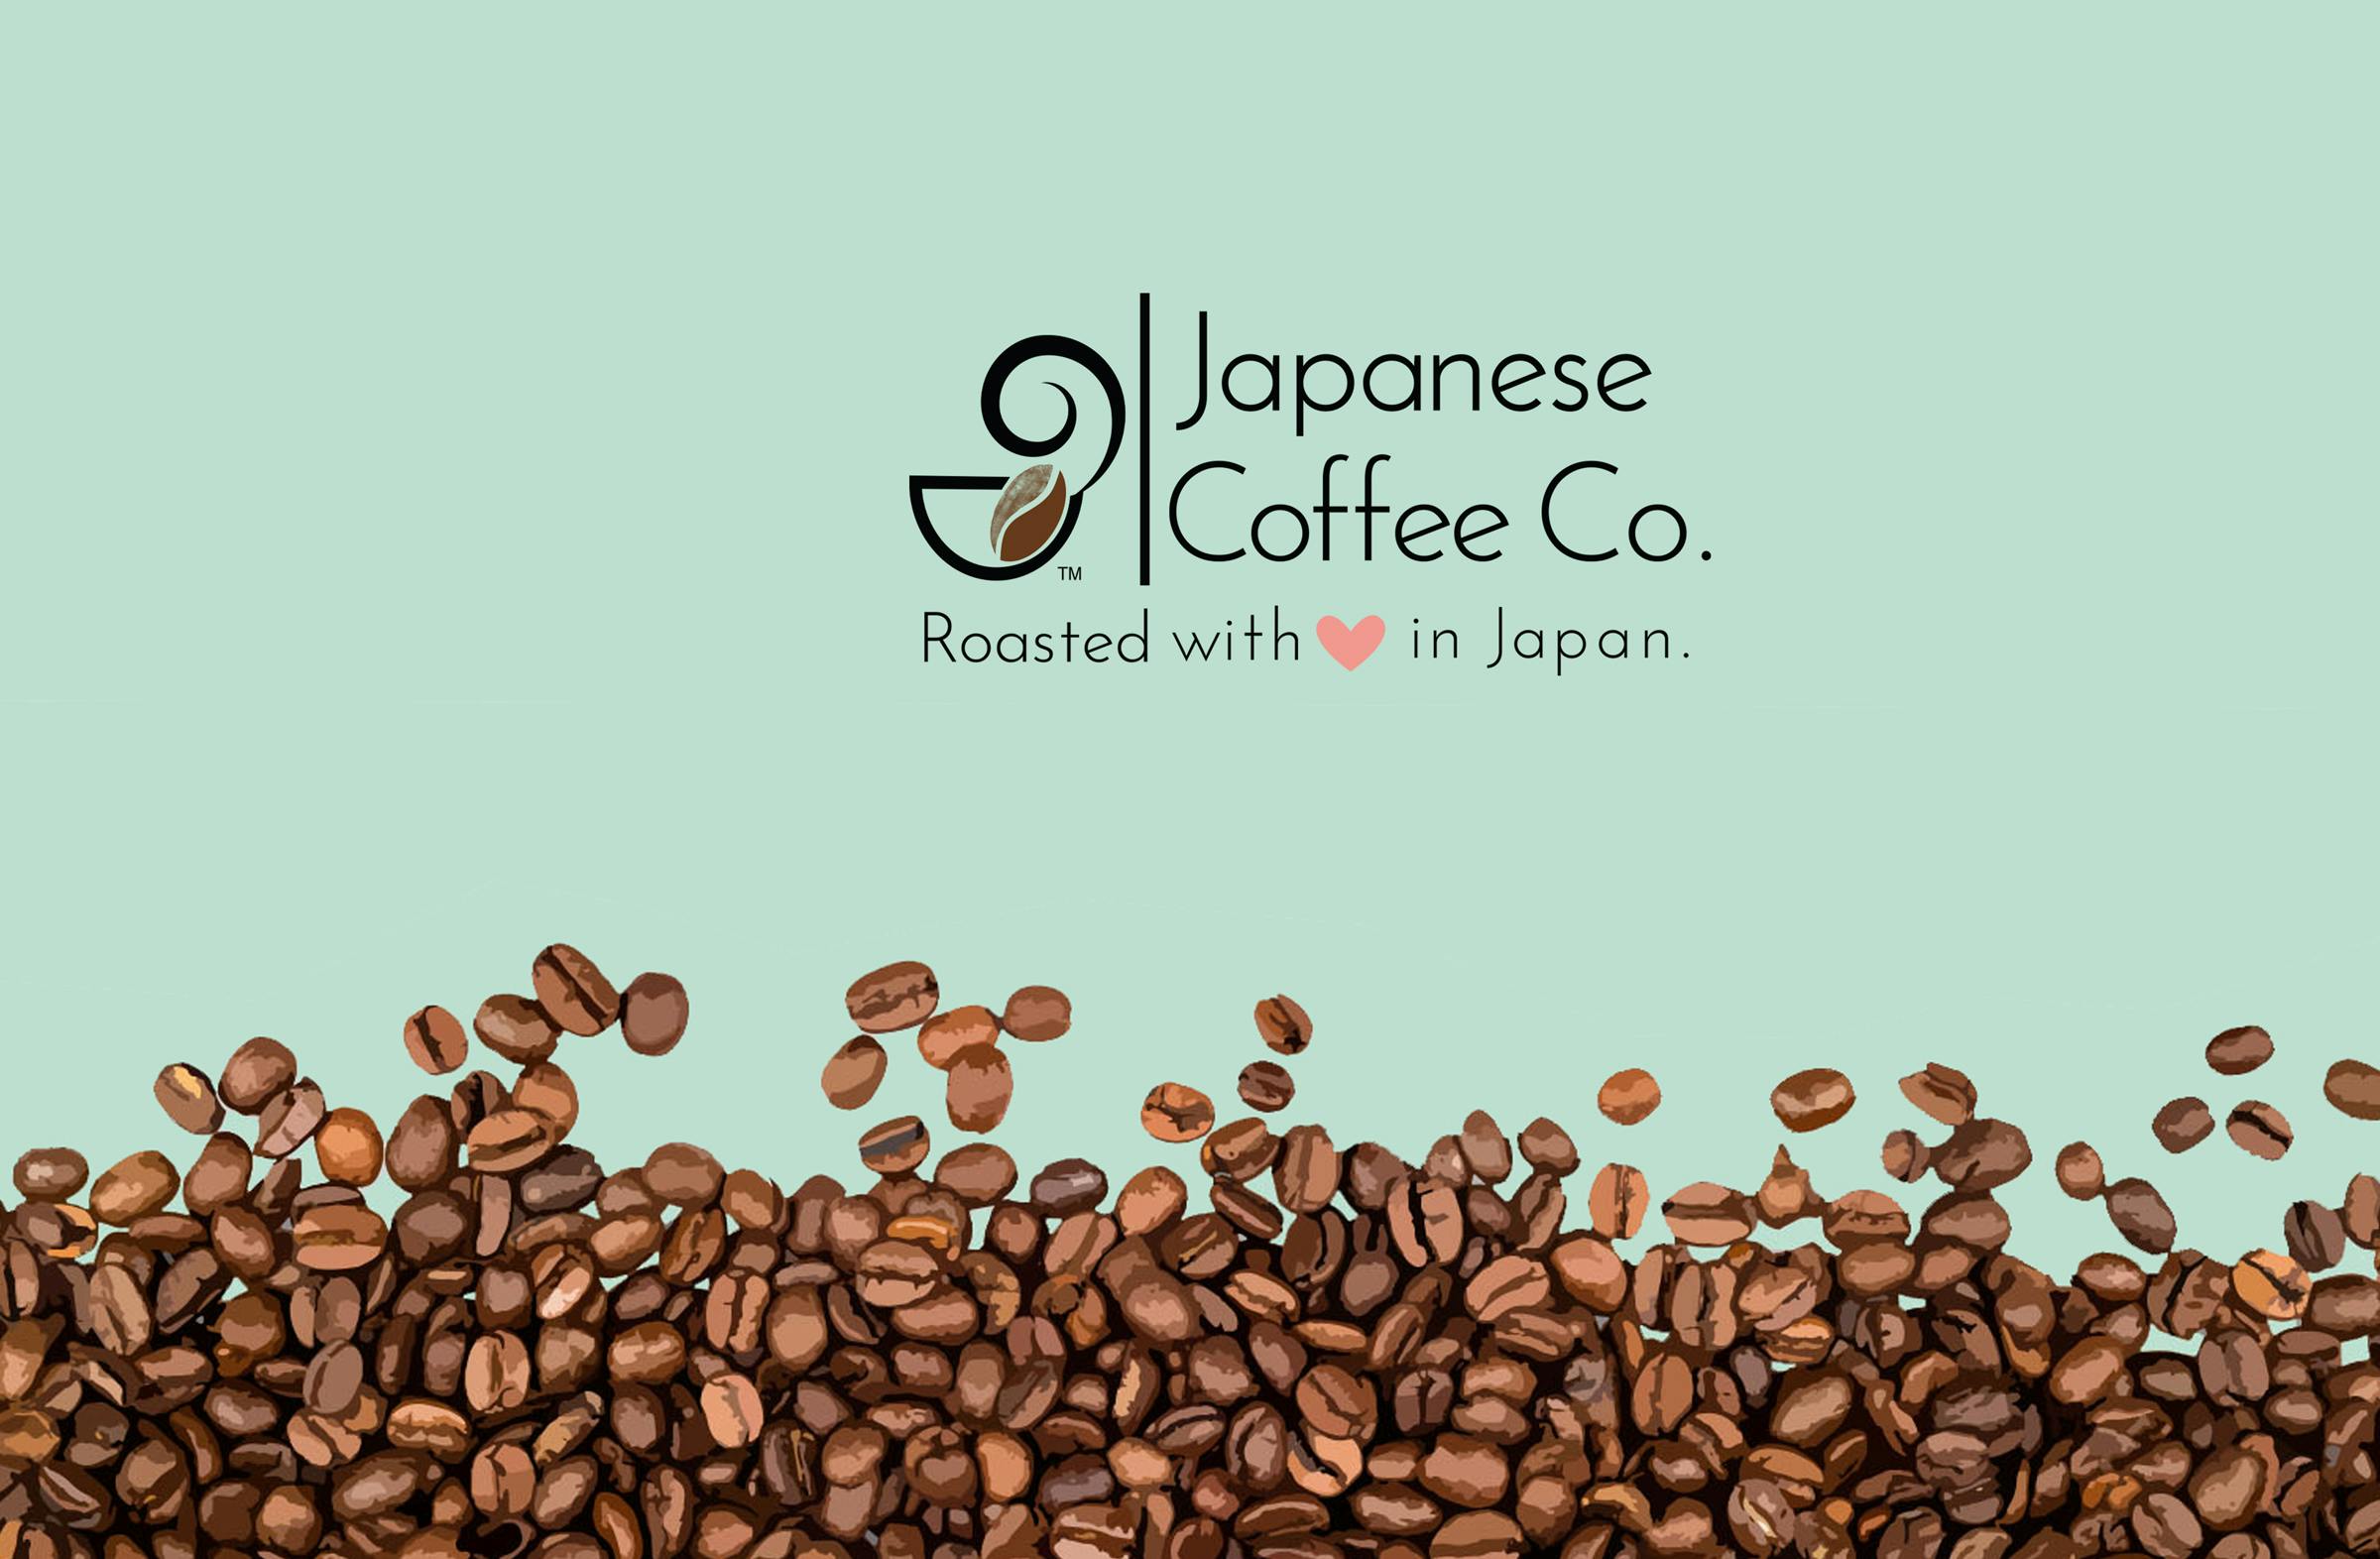 Image of Japanese Coffee Co.